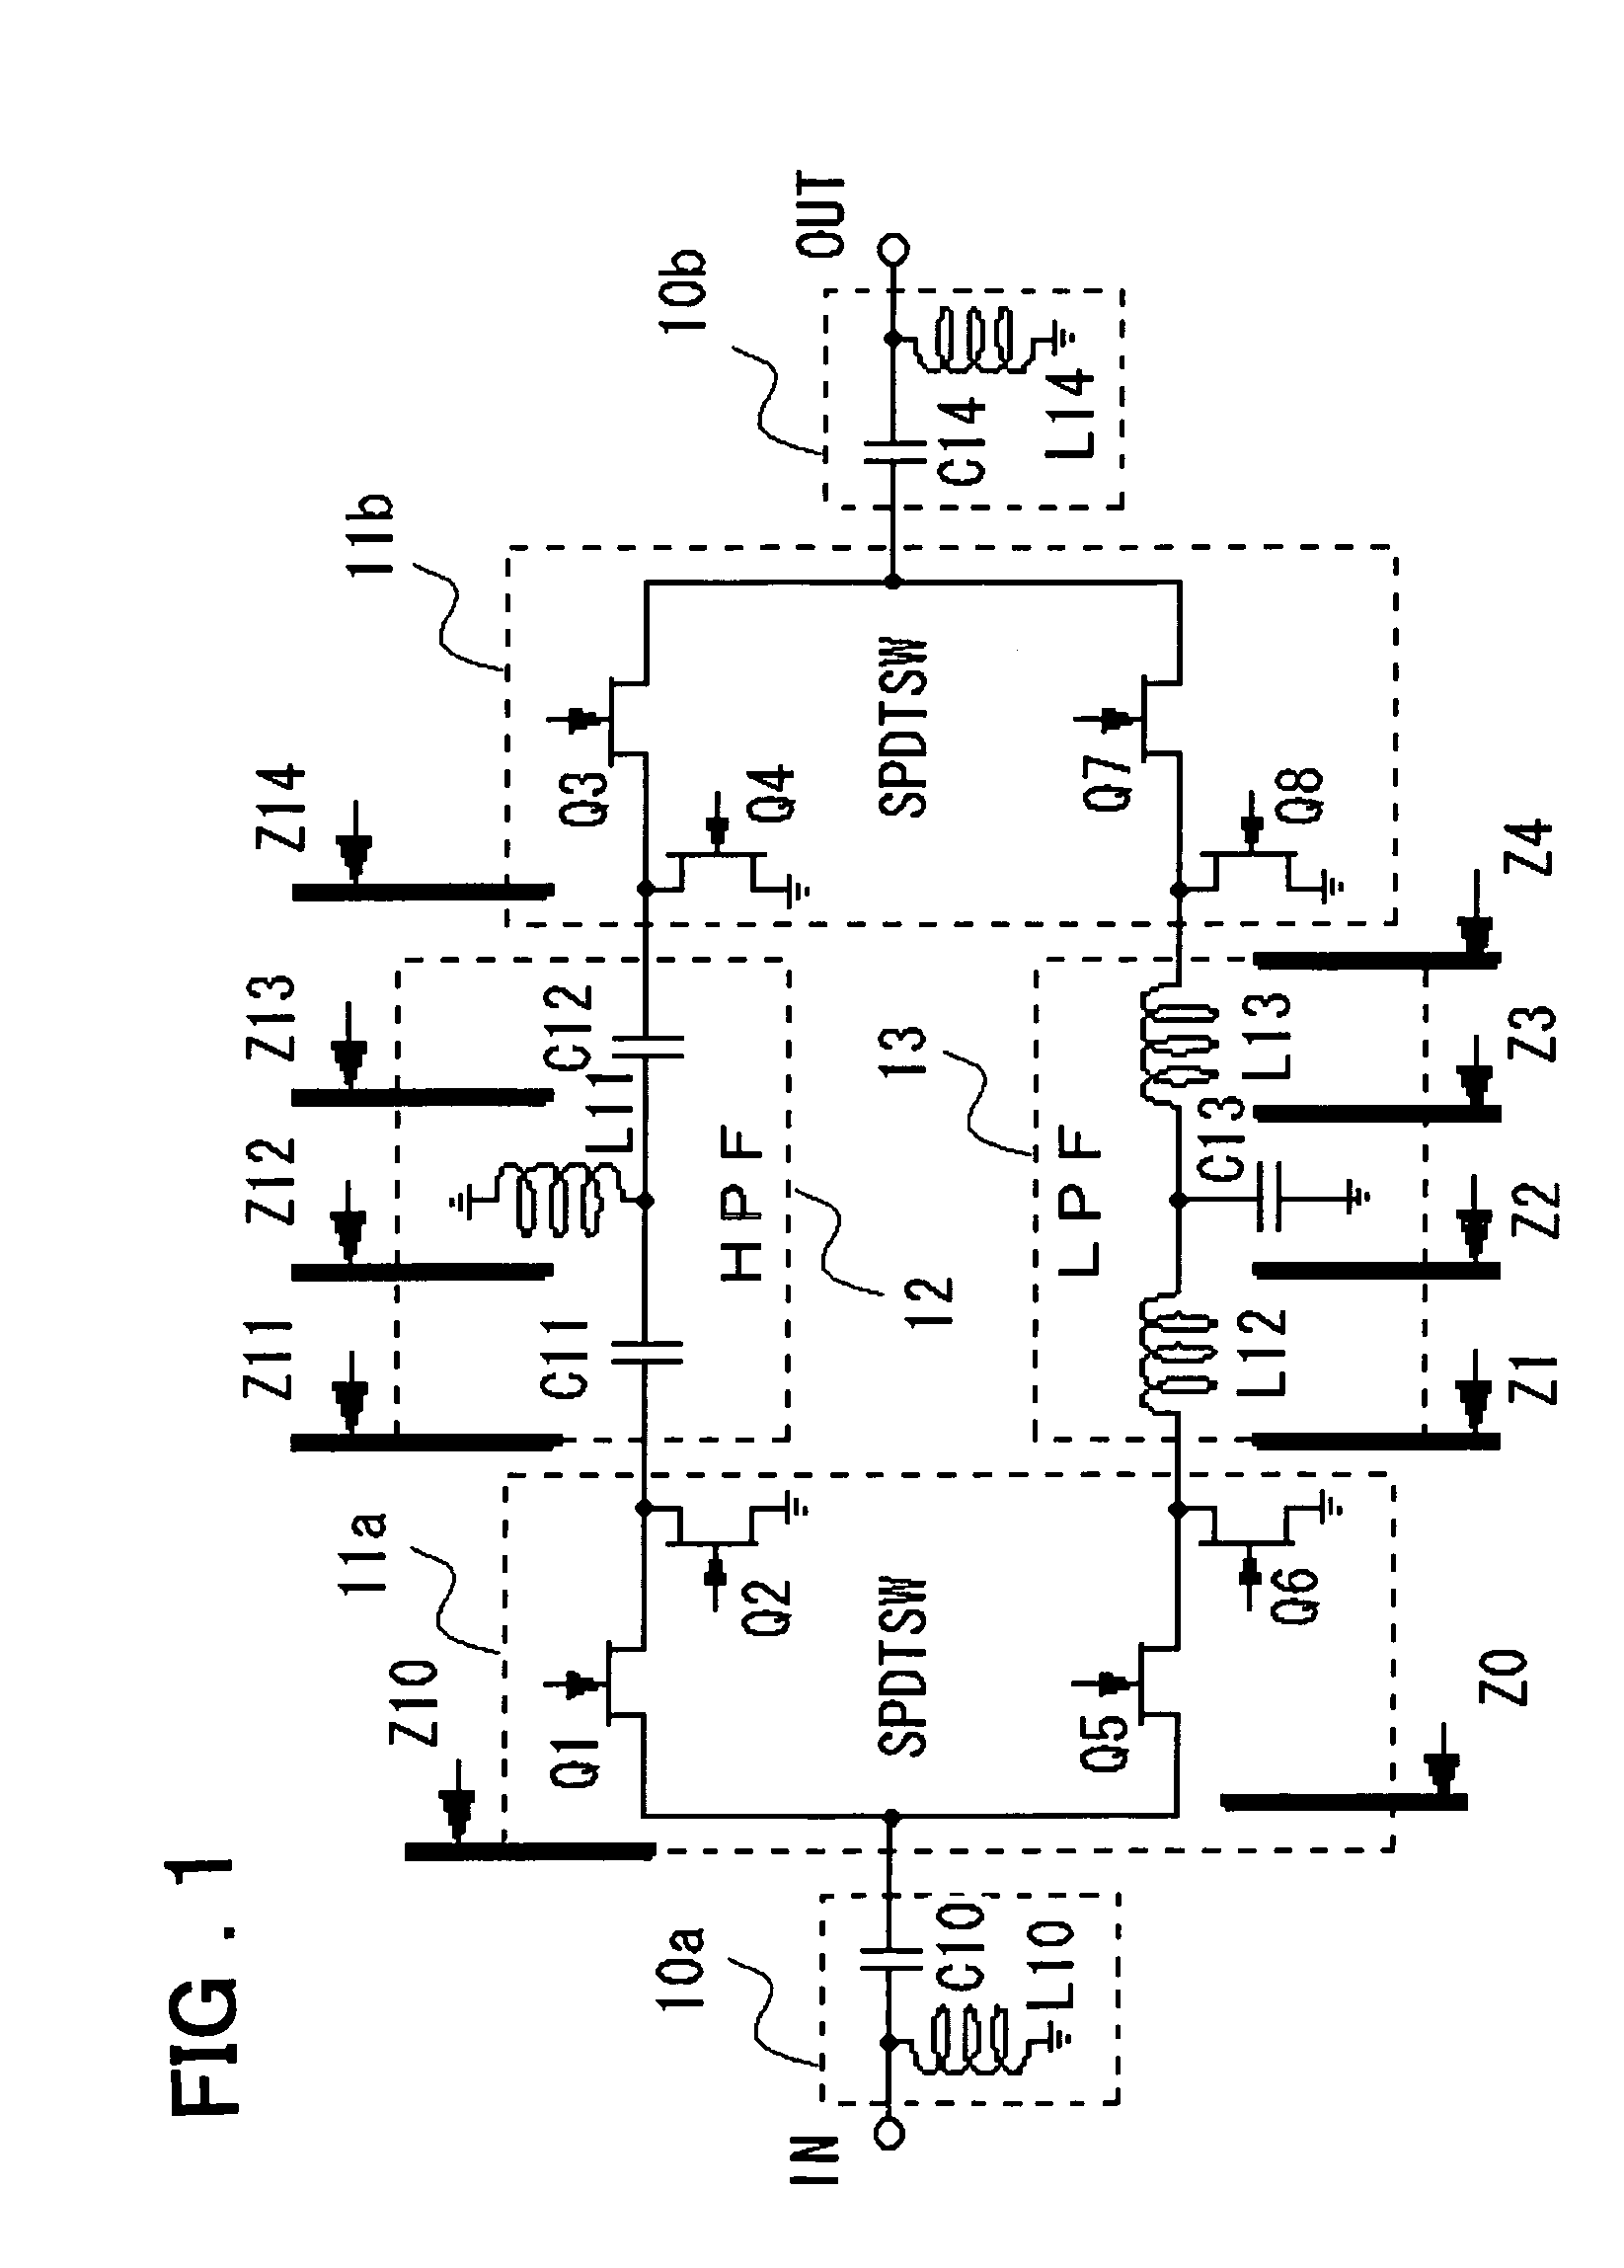 Phase shifter having switchable high pass filter and low pass filter paths and impedance adjustment circuits